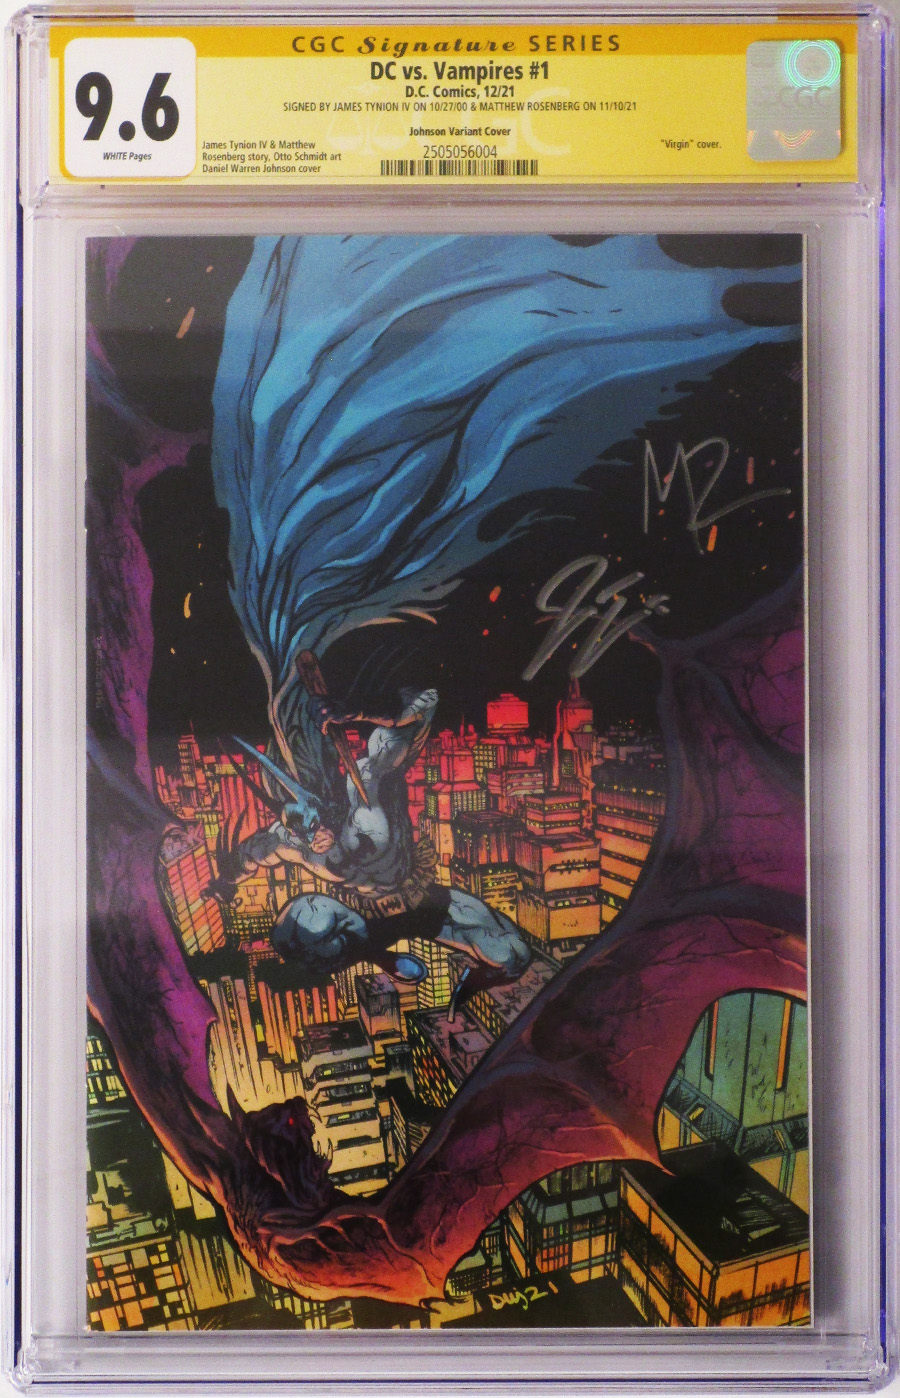 DC Vs Vampires #1 Cover N Incentive Daniel Warren Johnson Card Stock Variant Cover Signed By James Tynion IV and Matthew Rosenberg CGC 9.6